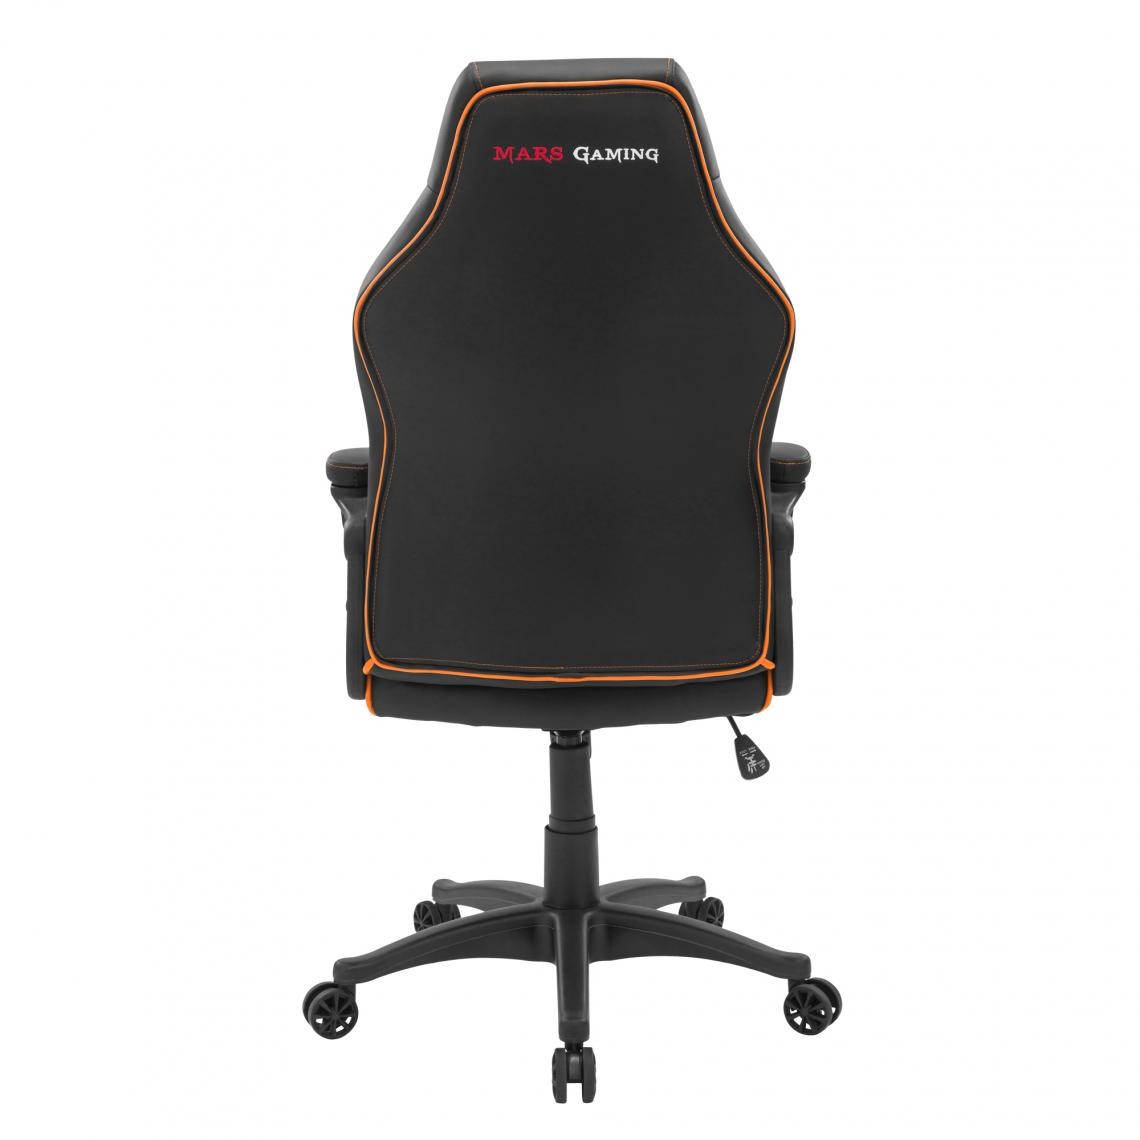 Mars Gaming - Fauteuil MGCX One (Noir/Orange) - Chaise gamer